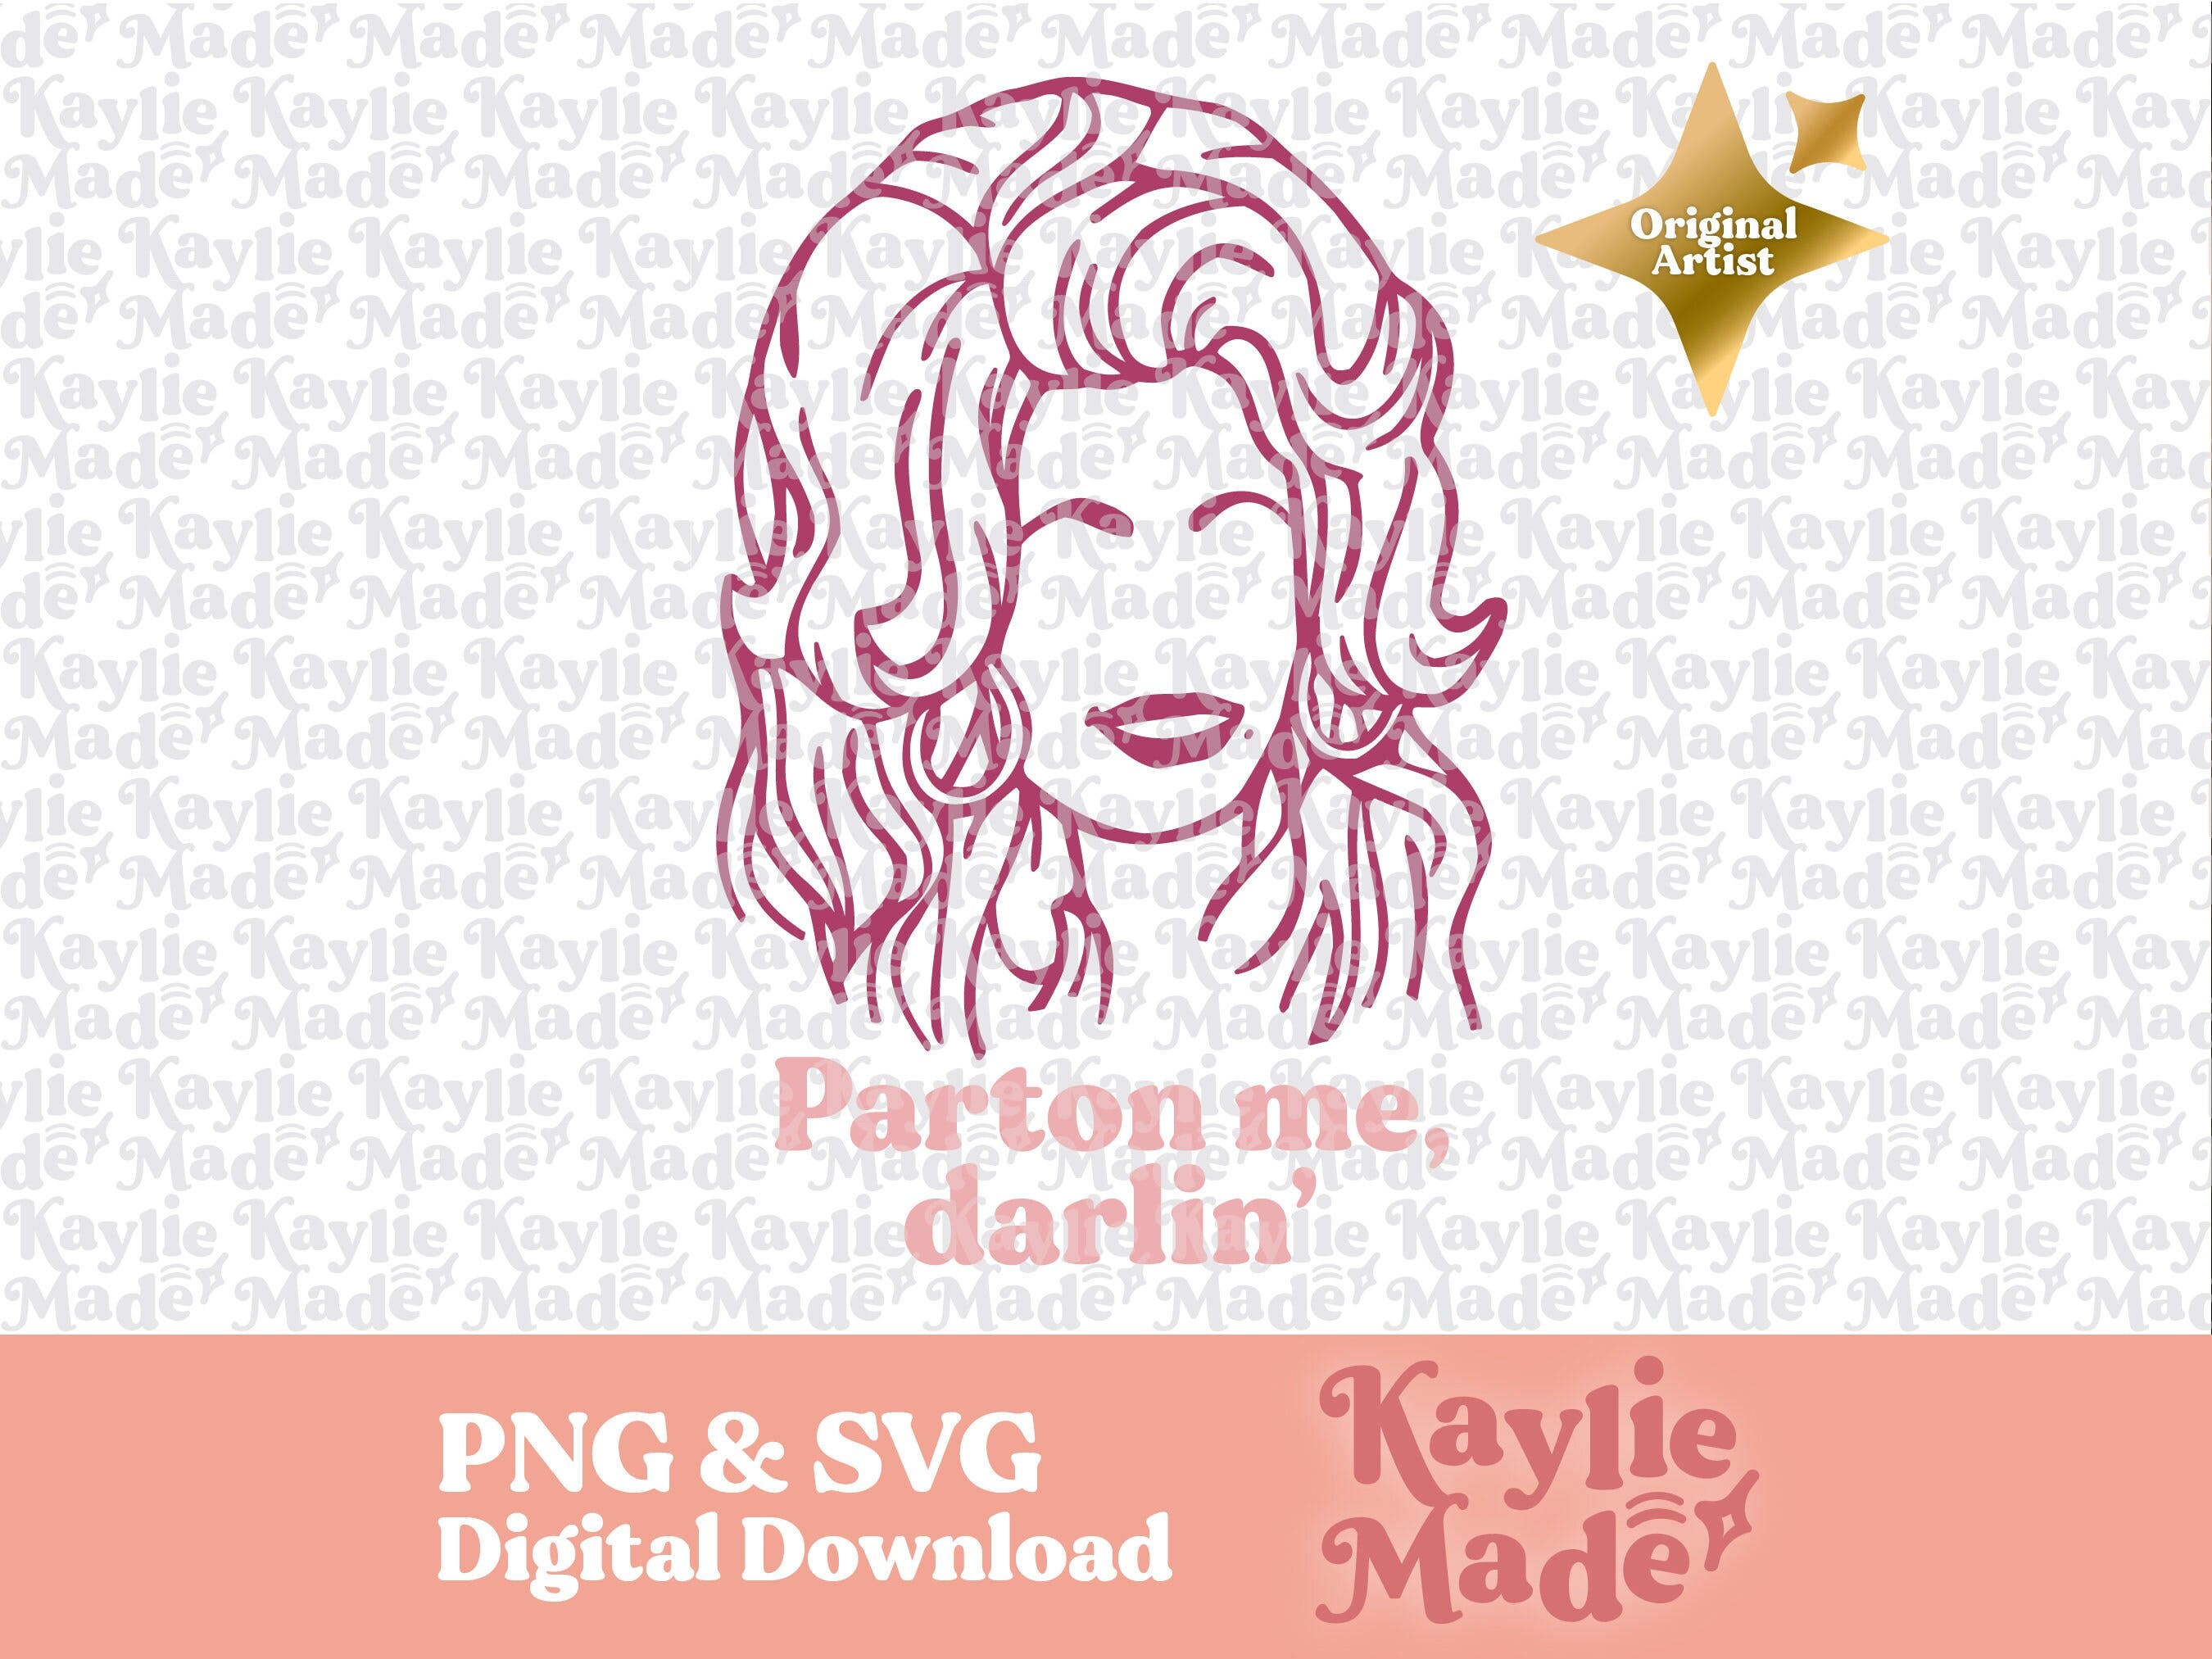 Dolly Parton SVG, Dolly Parton Png, Parton Me, Cowgirl Svg, Country Music Svg, Dolly Svg, Western Svg, In Dolly We Trust, Dolly Parton Print